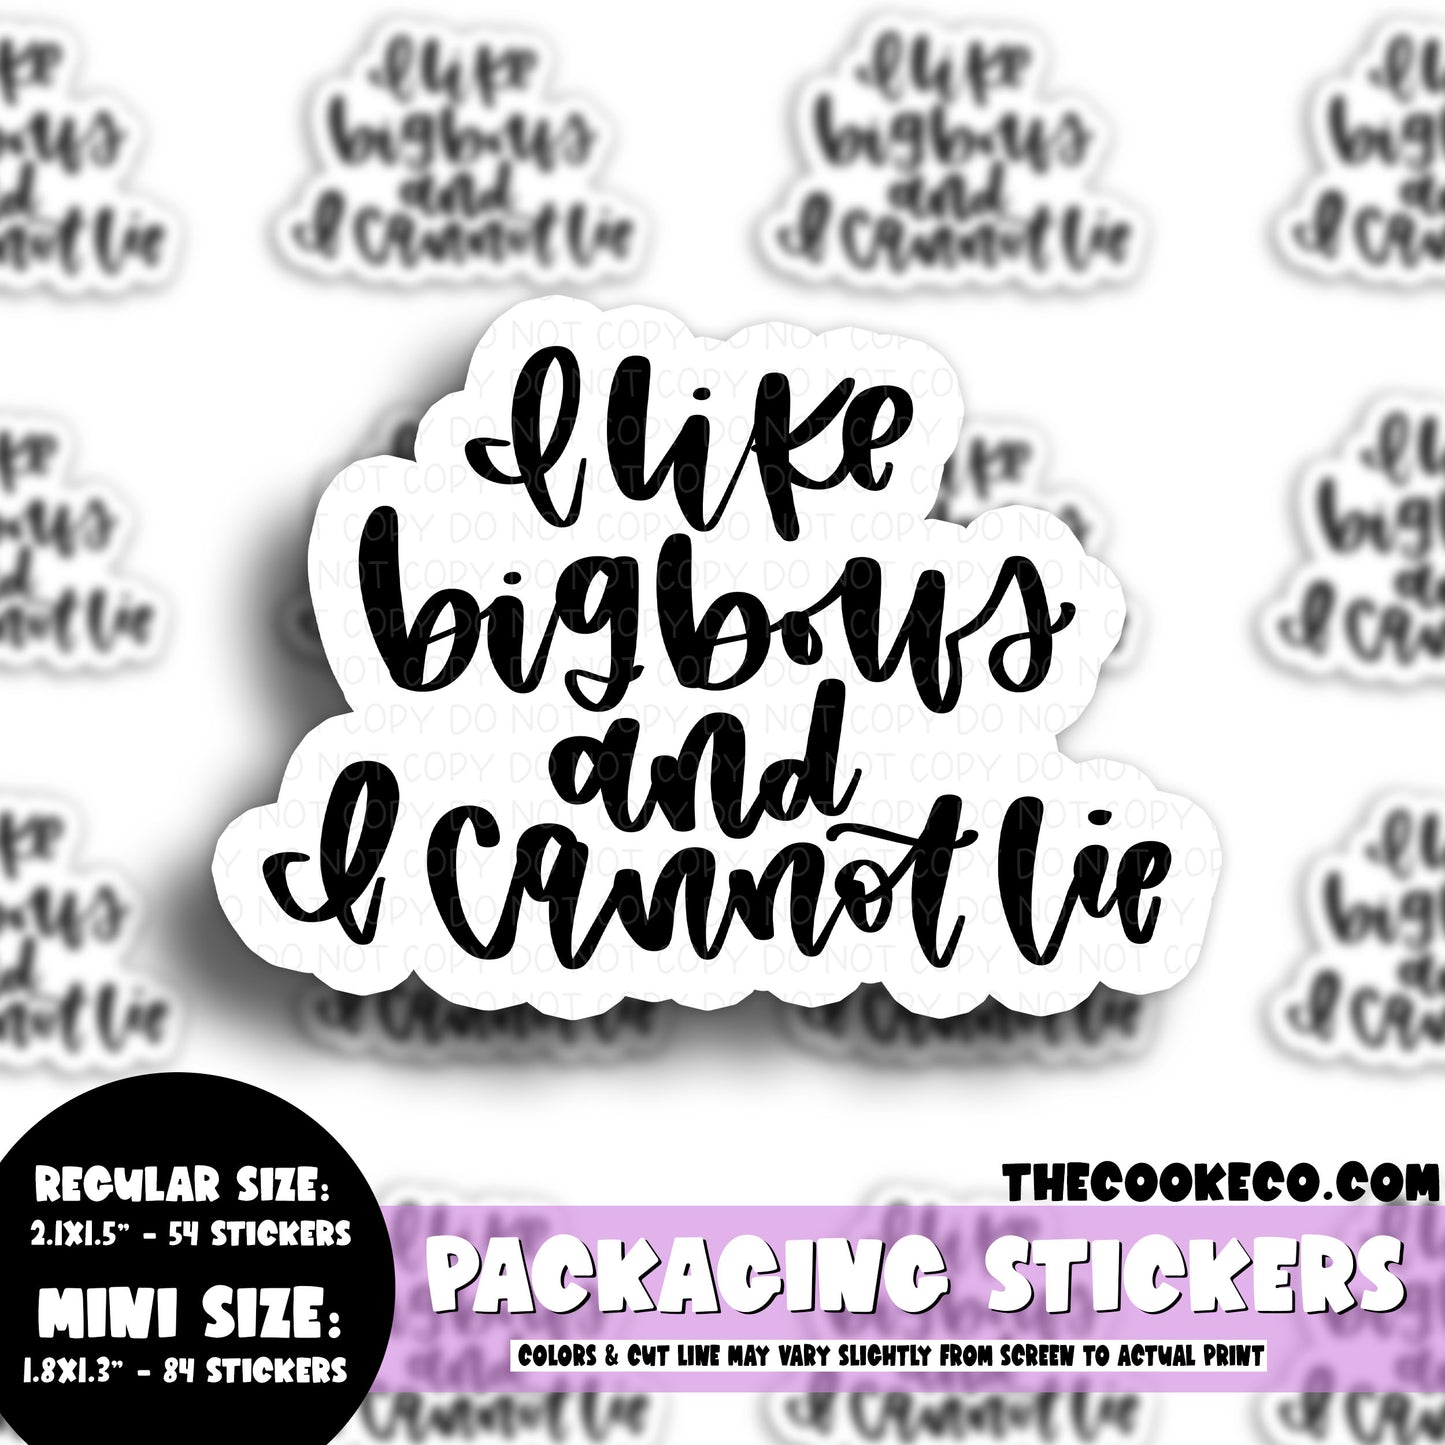 Packaging Stickers | #BW0121 - I LIKE BIG BOWS AND I CANNOT LIE